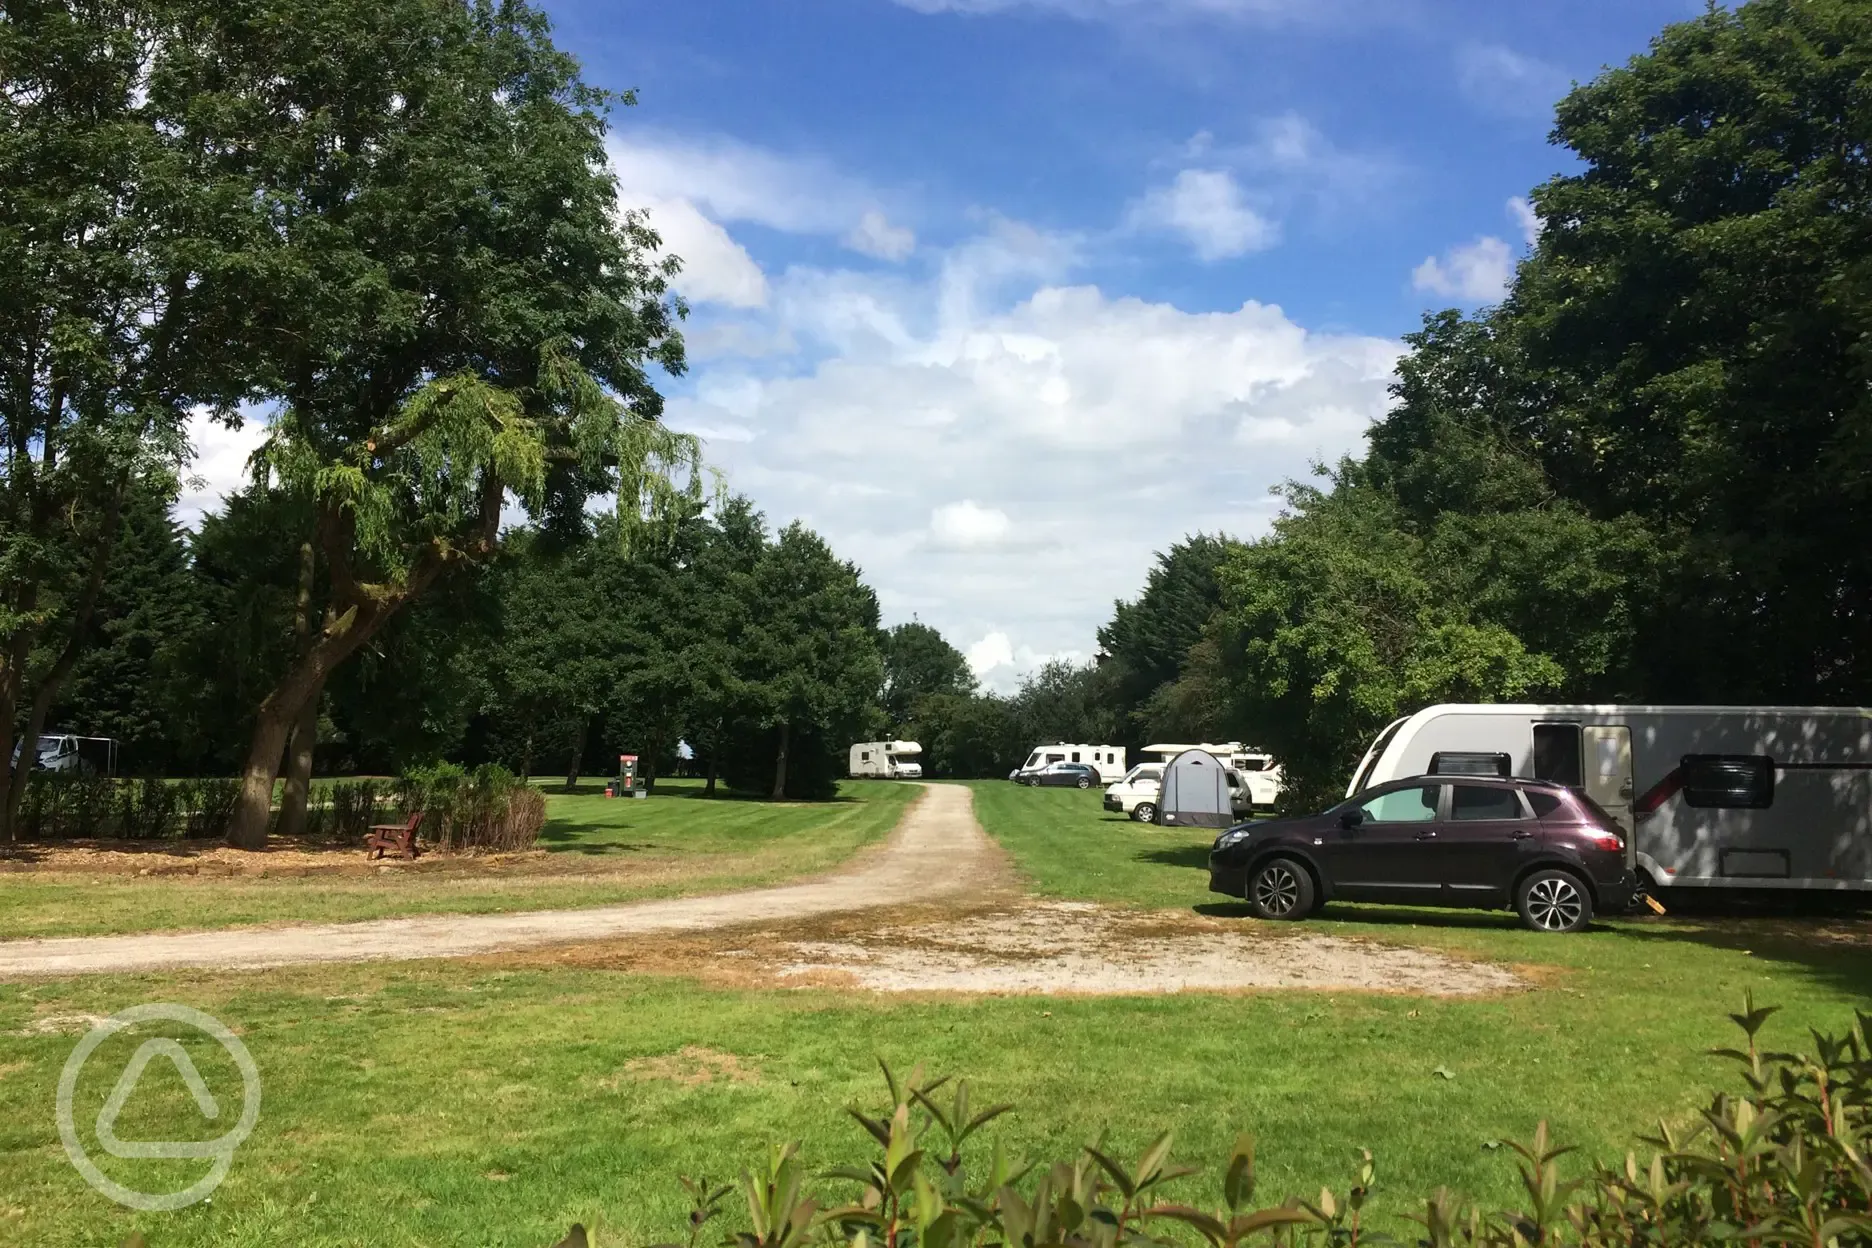 With only 15 touring pitches there is plenty room to enjoy the surrounding campsite